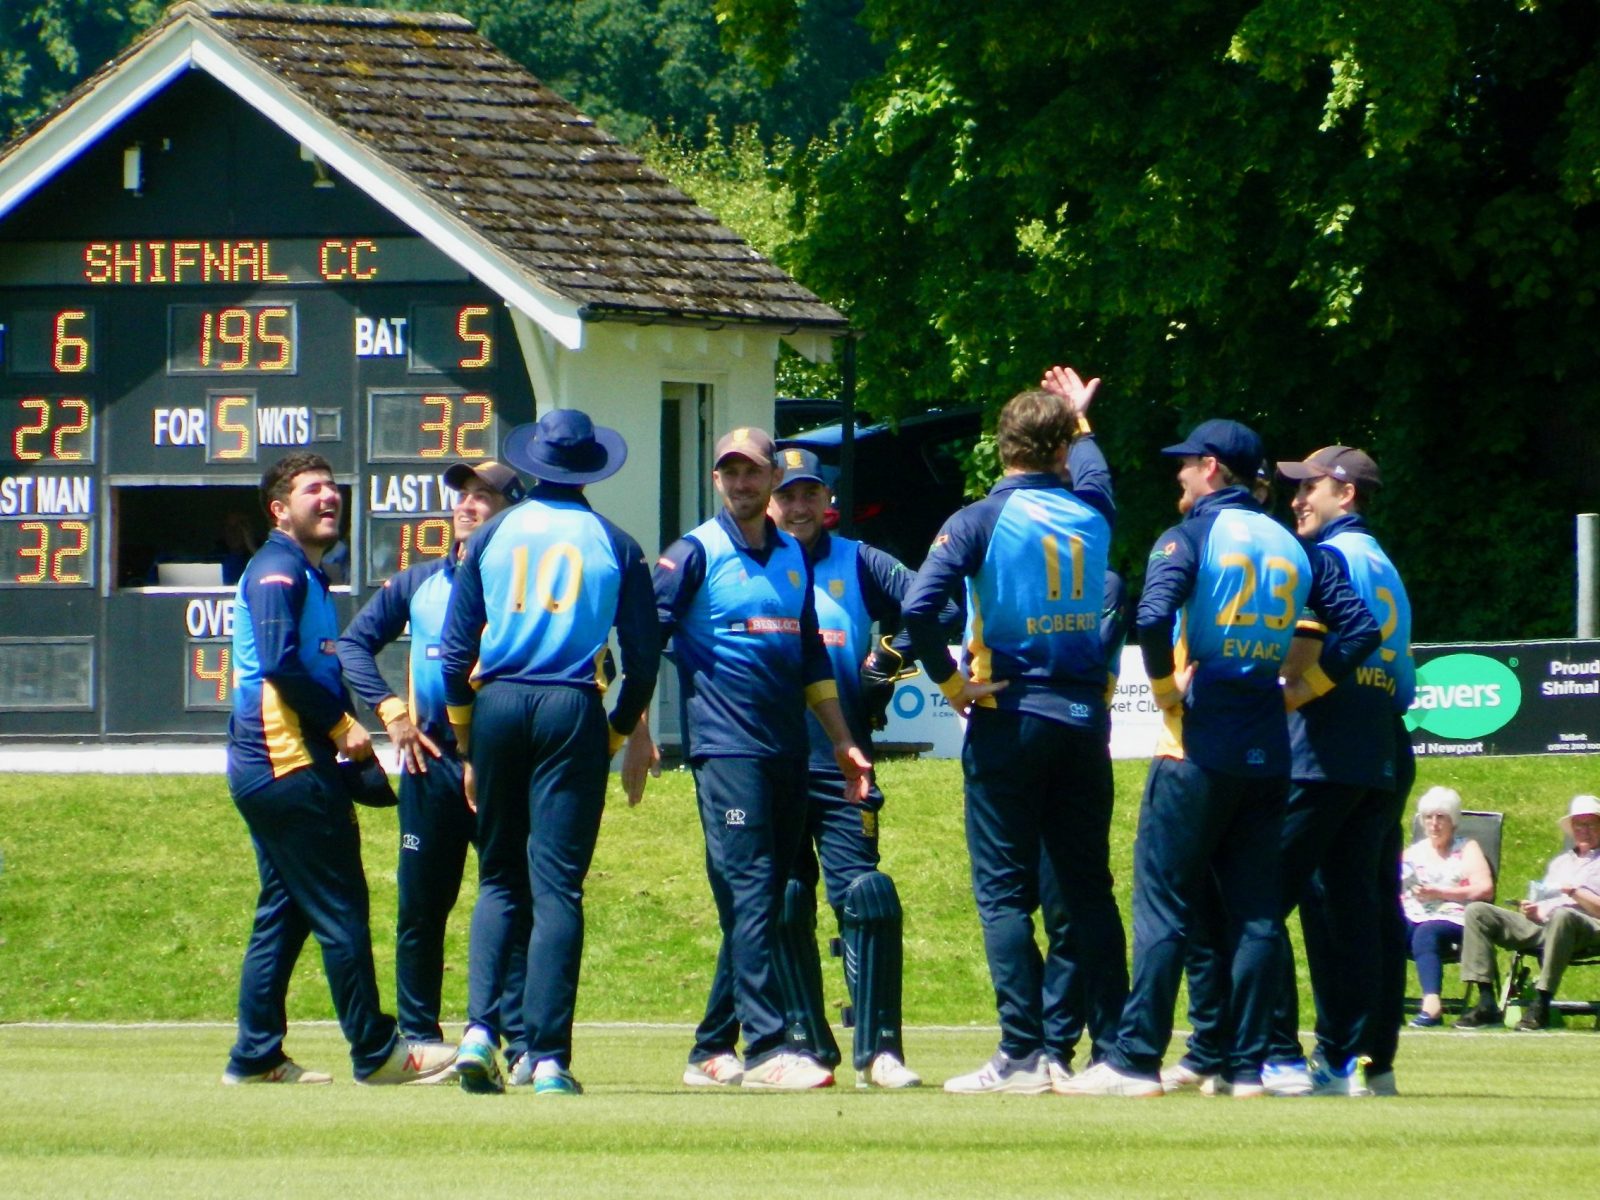 Shropshire celebrate a wicket during the match against Suffolk